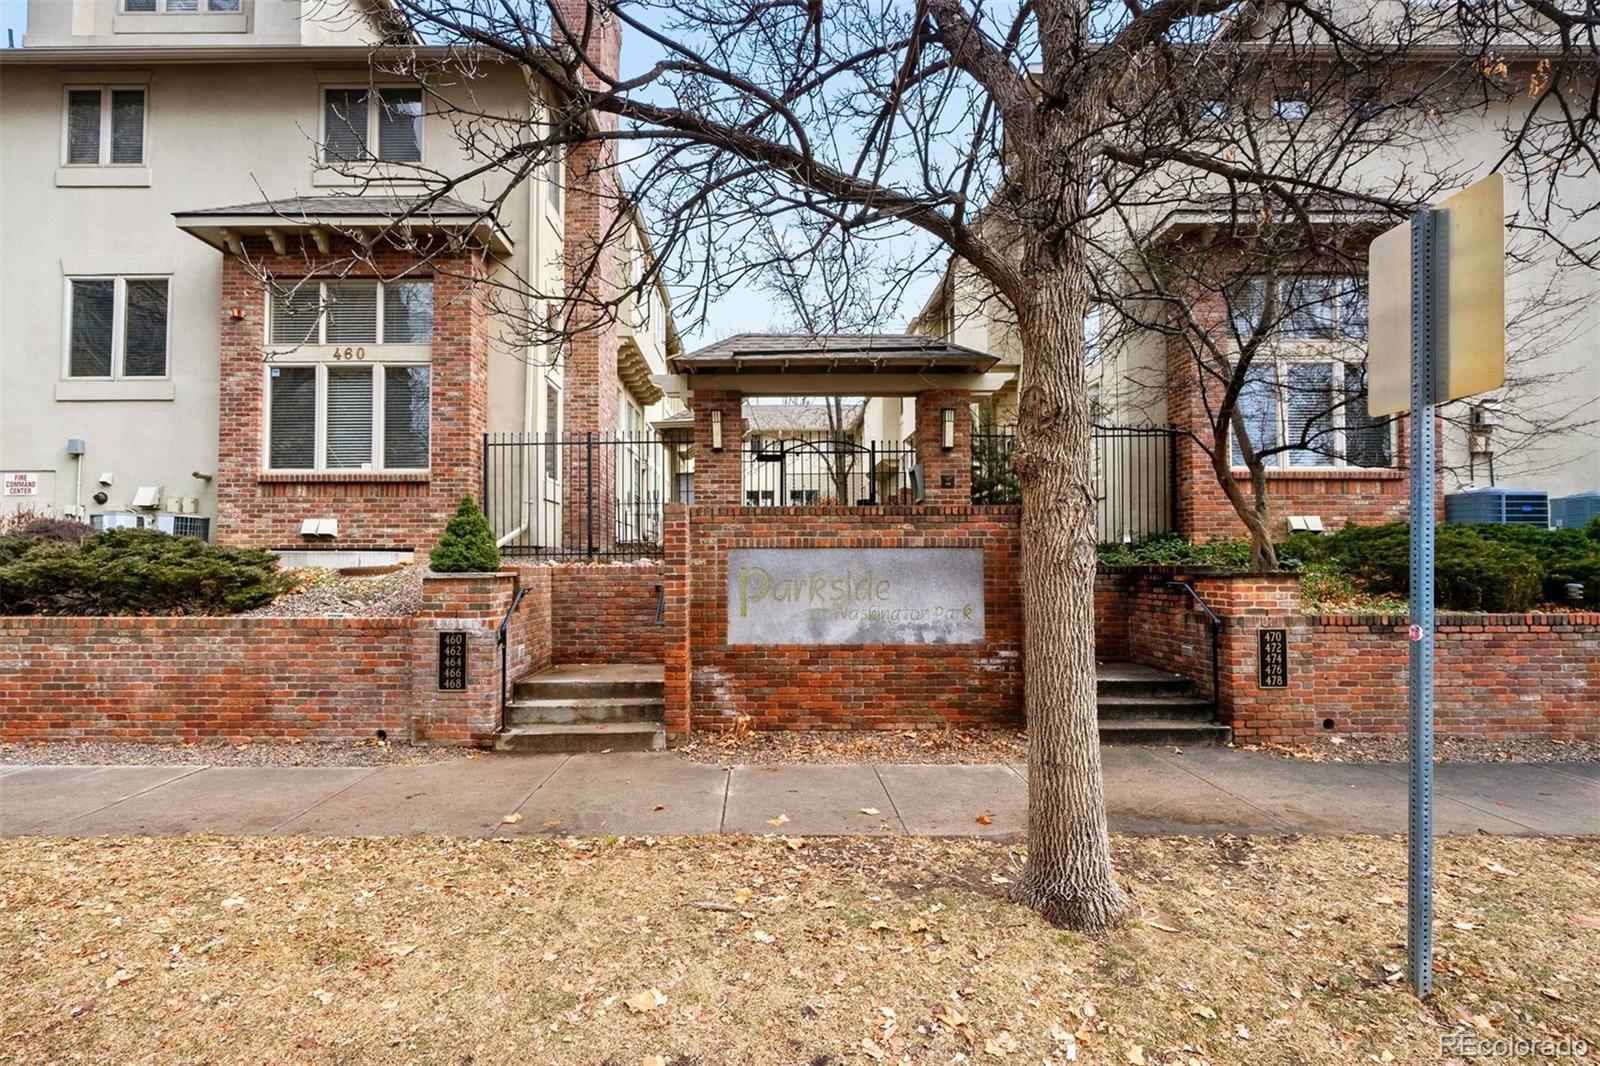 478 s lafayette street, denver sold home. Closed on 2024-02-28 for $950,000.